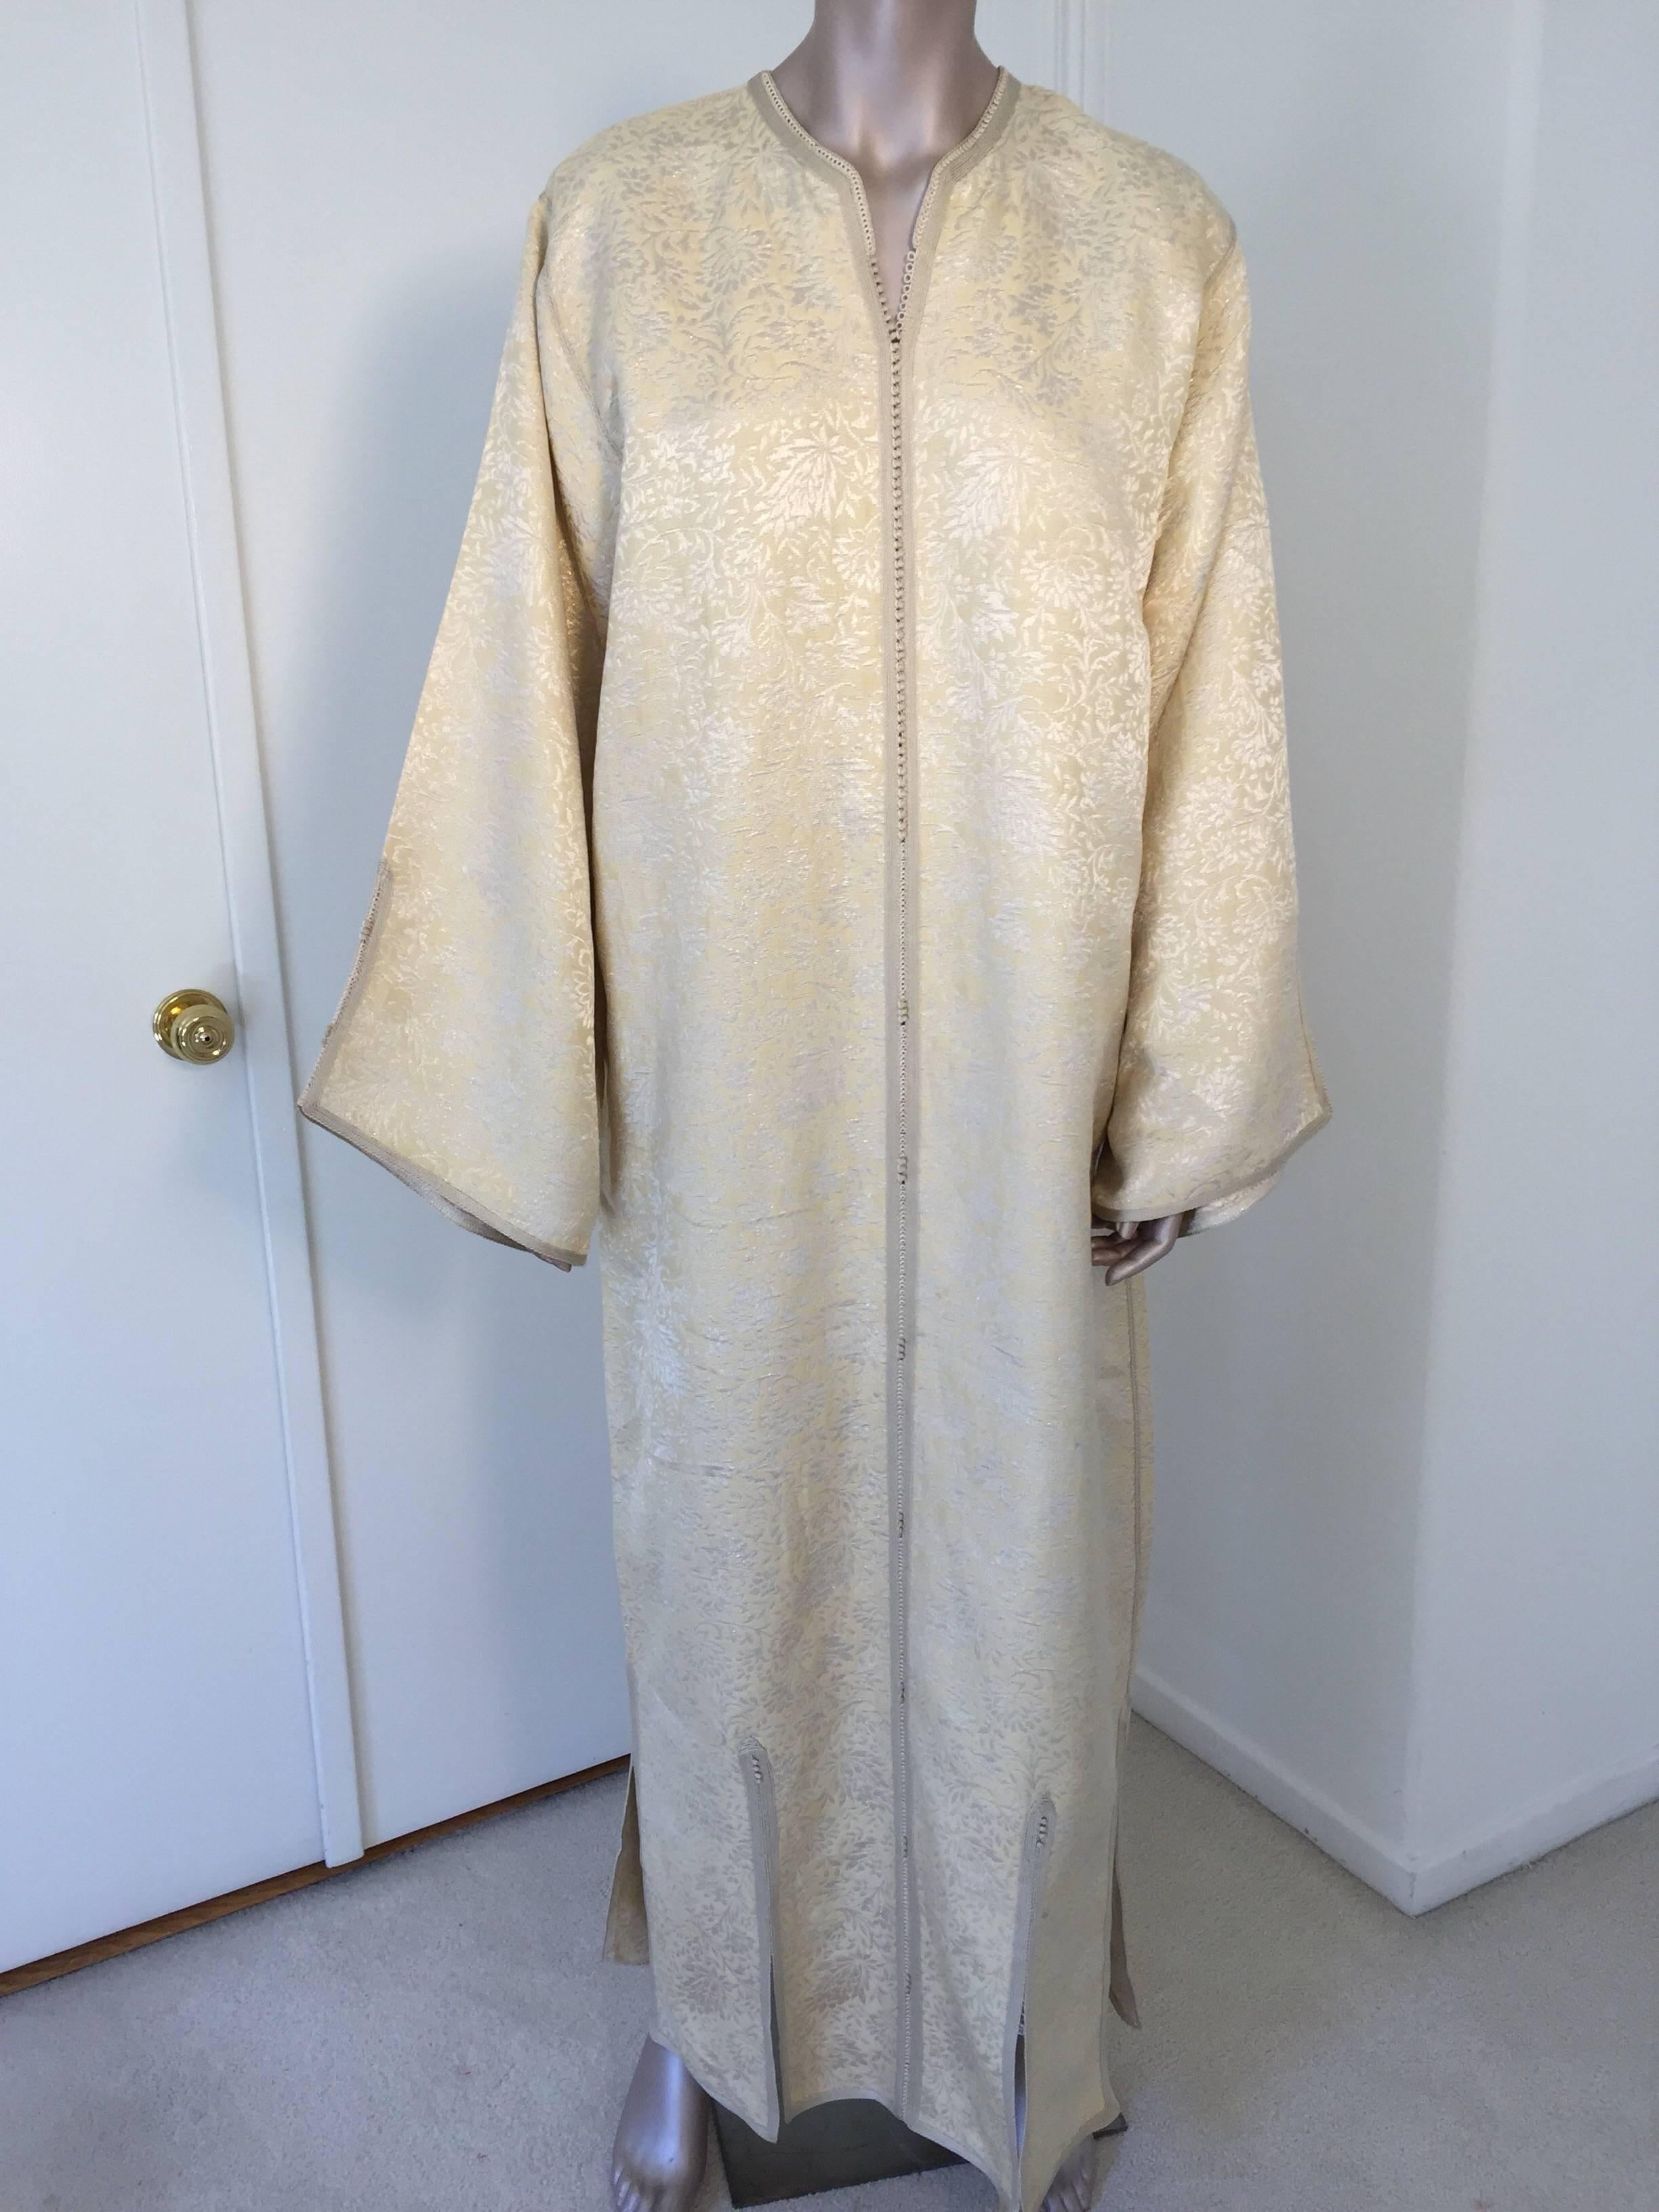 Moroccan caftan, Evening or interior gold and silver brocade dress kaftan with fine trim.
Hand-made ceremonial caftan from North Africa, Morocco.
Vintage exotic 1970s gold and silver brocade caftan gown.
The luminous caftan maxi dress caftan is made